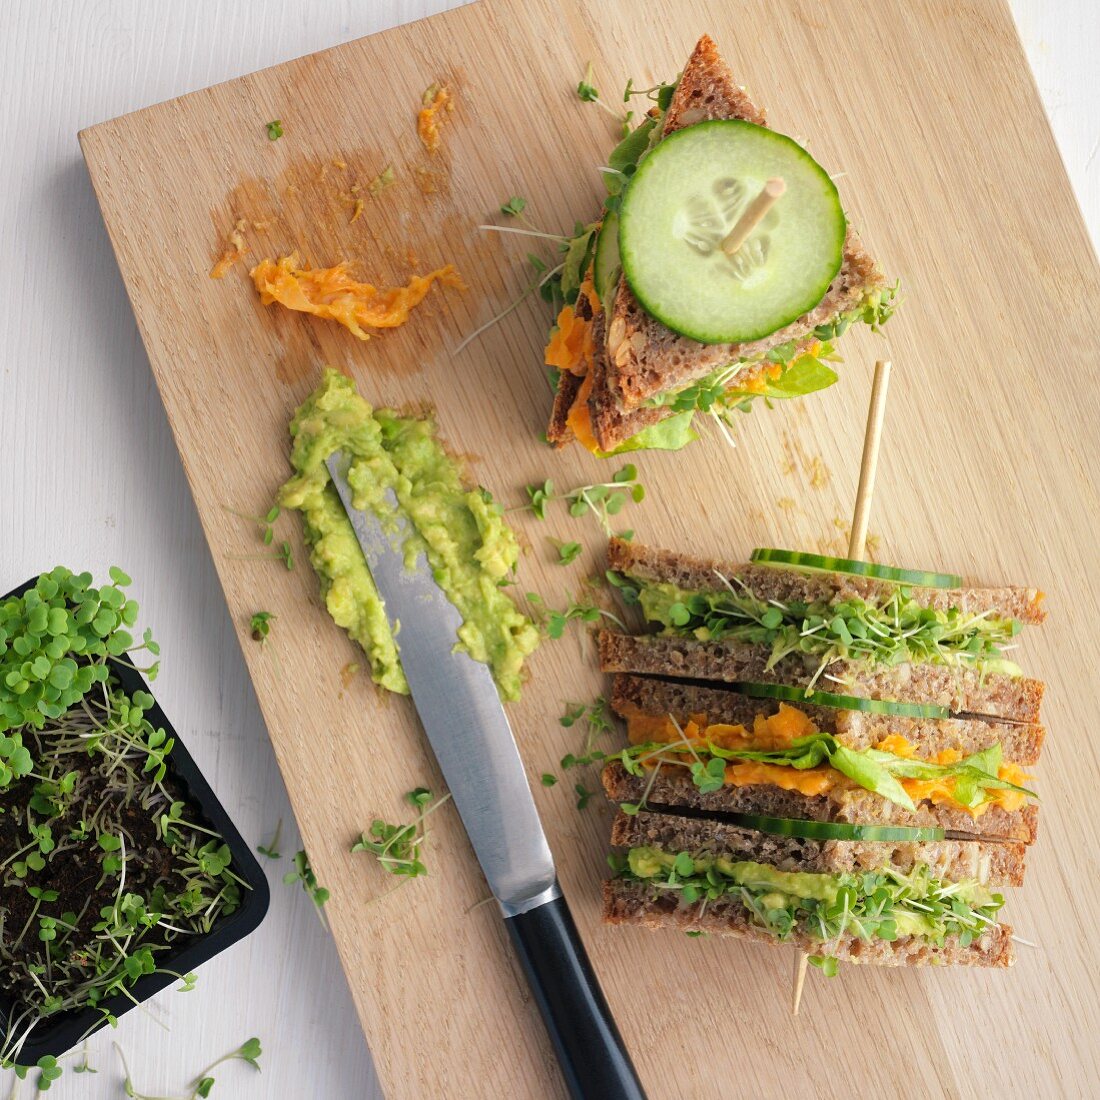 Triangular sandwiches on a sticks with carrots, cucumber, avocado and tahini